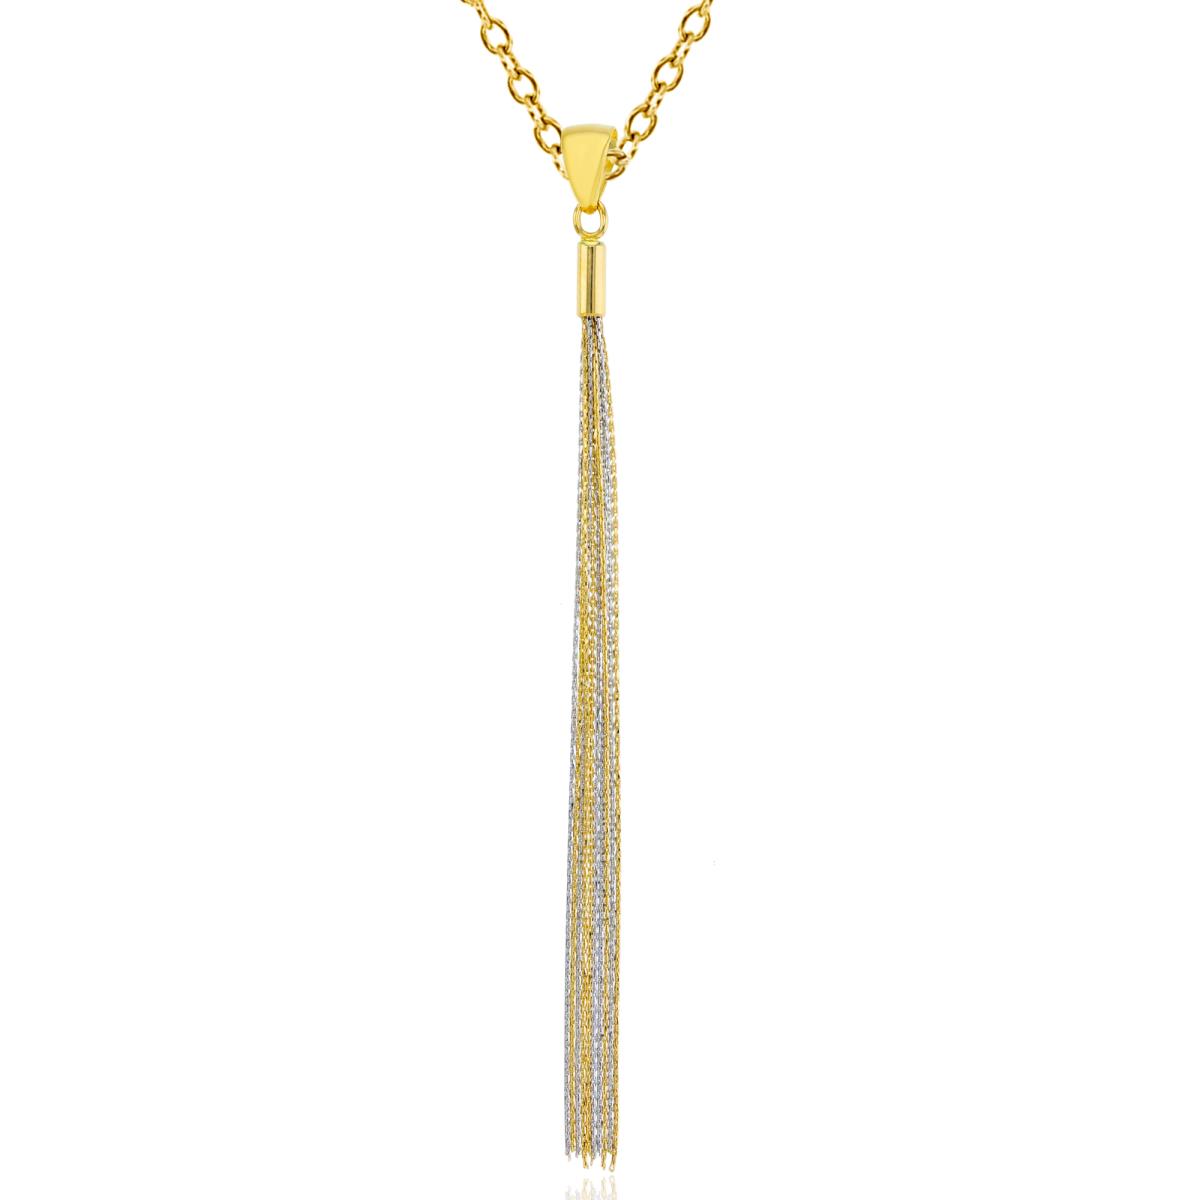 14K Two-Tone Gold Tassle Dangling 18" Necklace